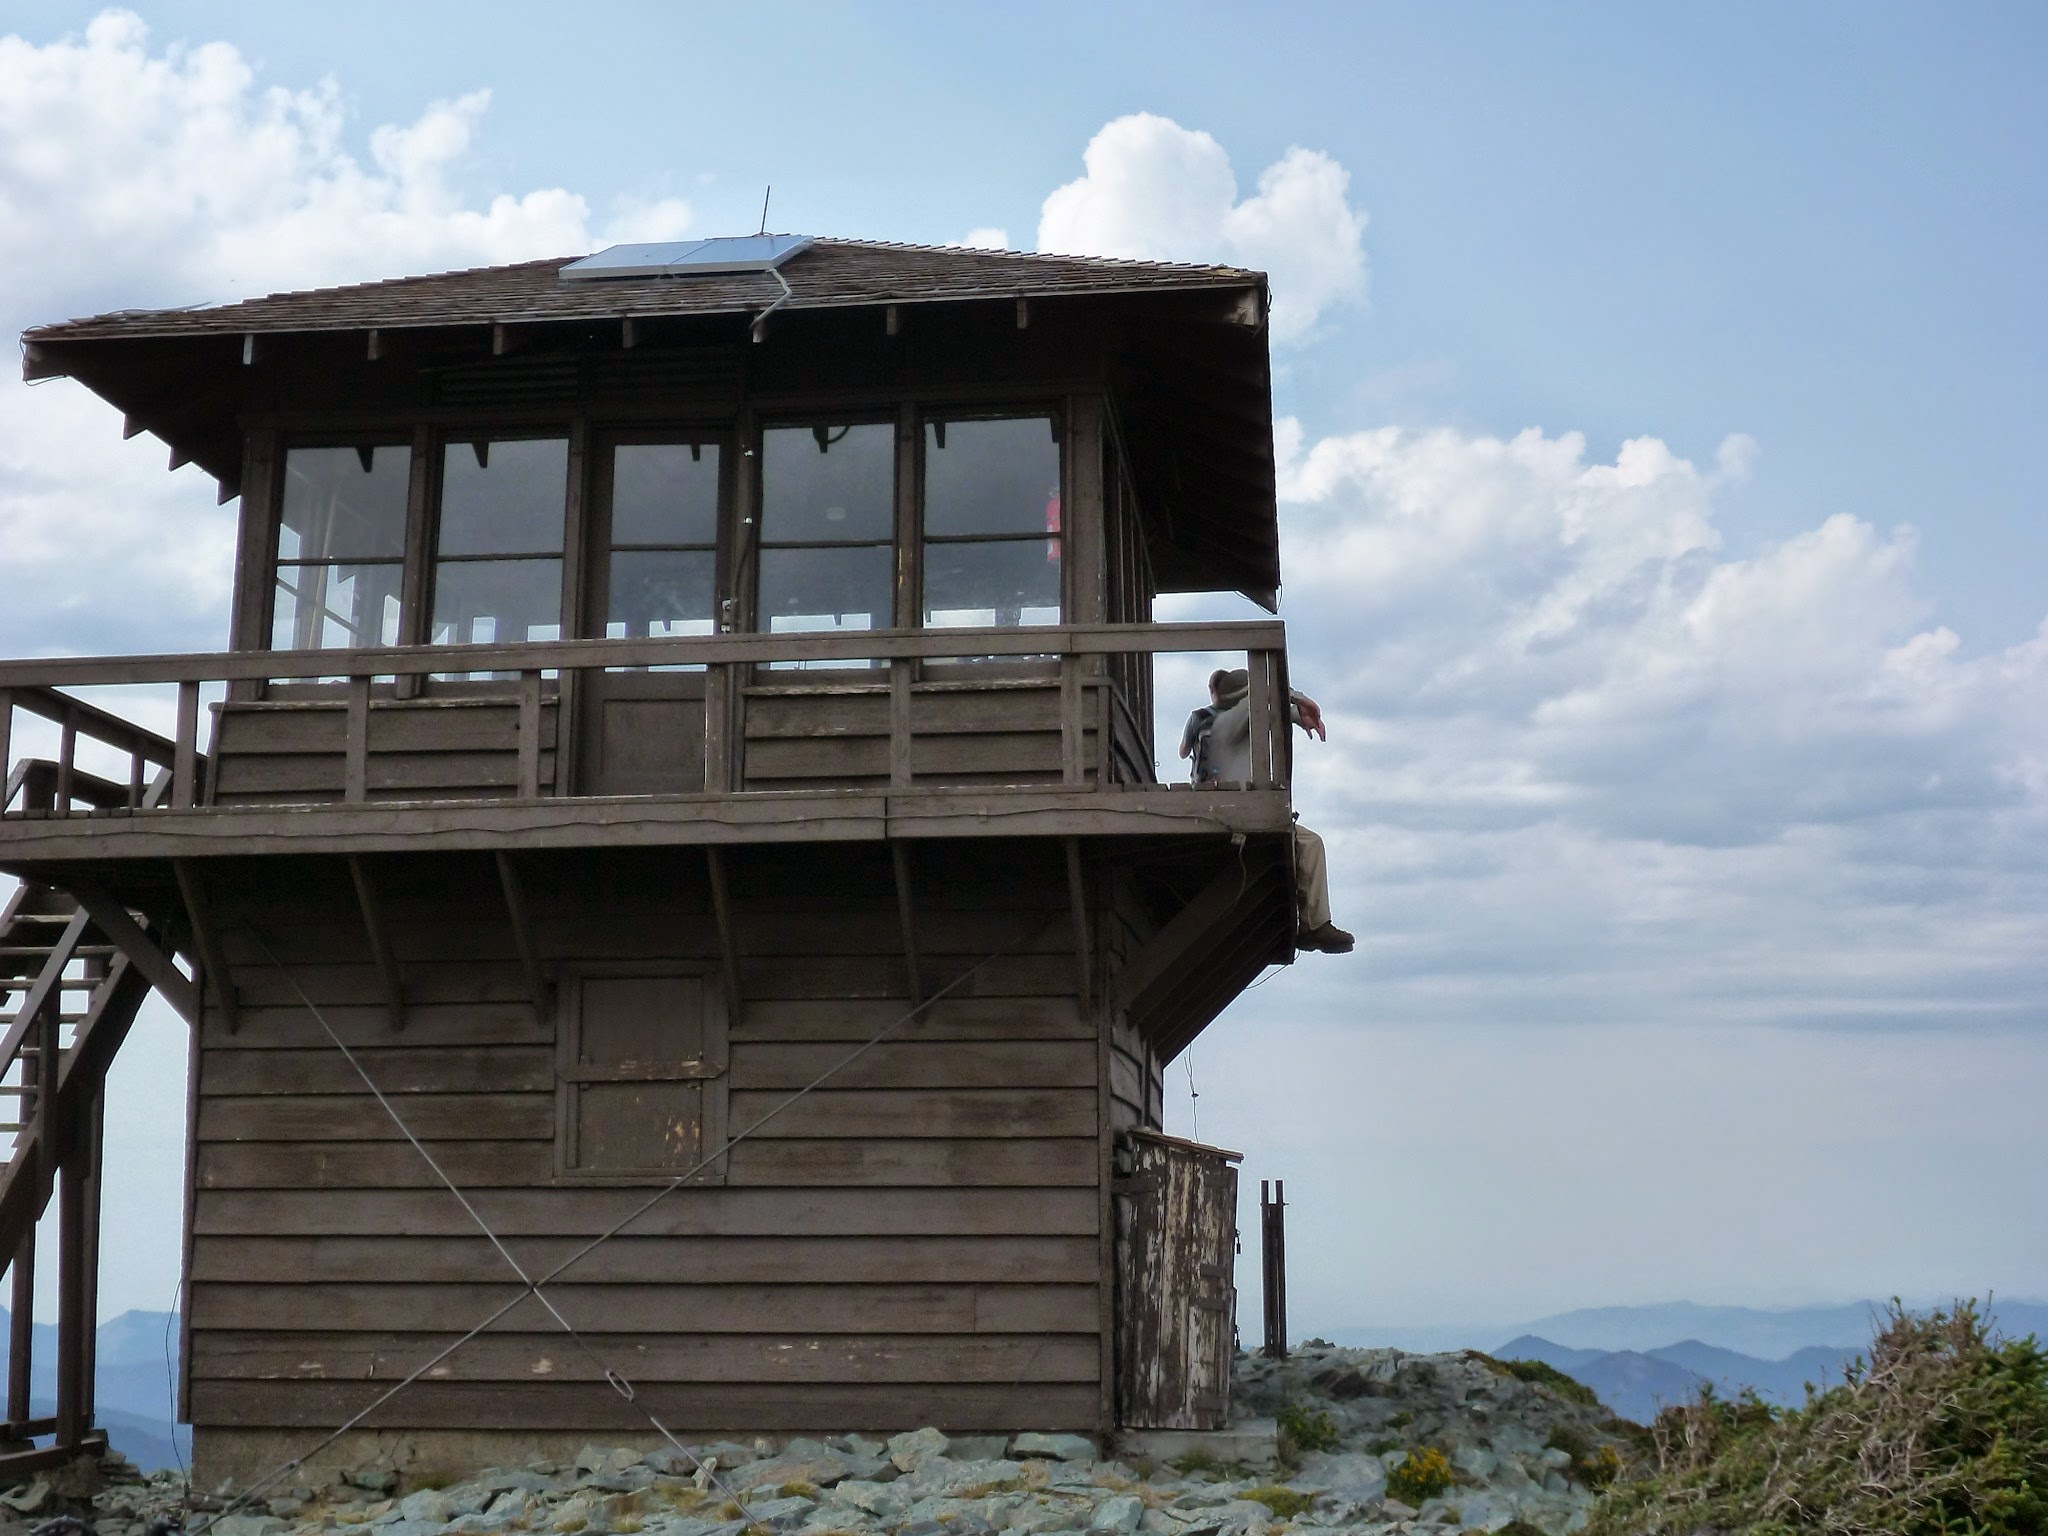 A brown wooden fire lookout tower on a pile of rocks. There are puffy clouds in a blue sky and distant mountains. Two people are sitting on the deck of the lookout tower on the Mt Fremont hike